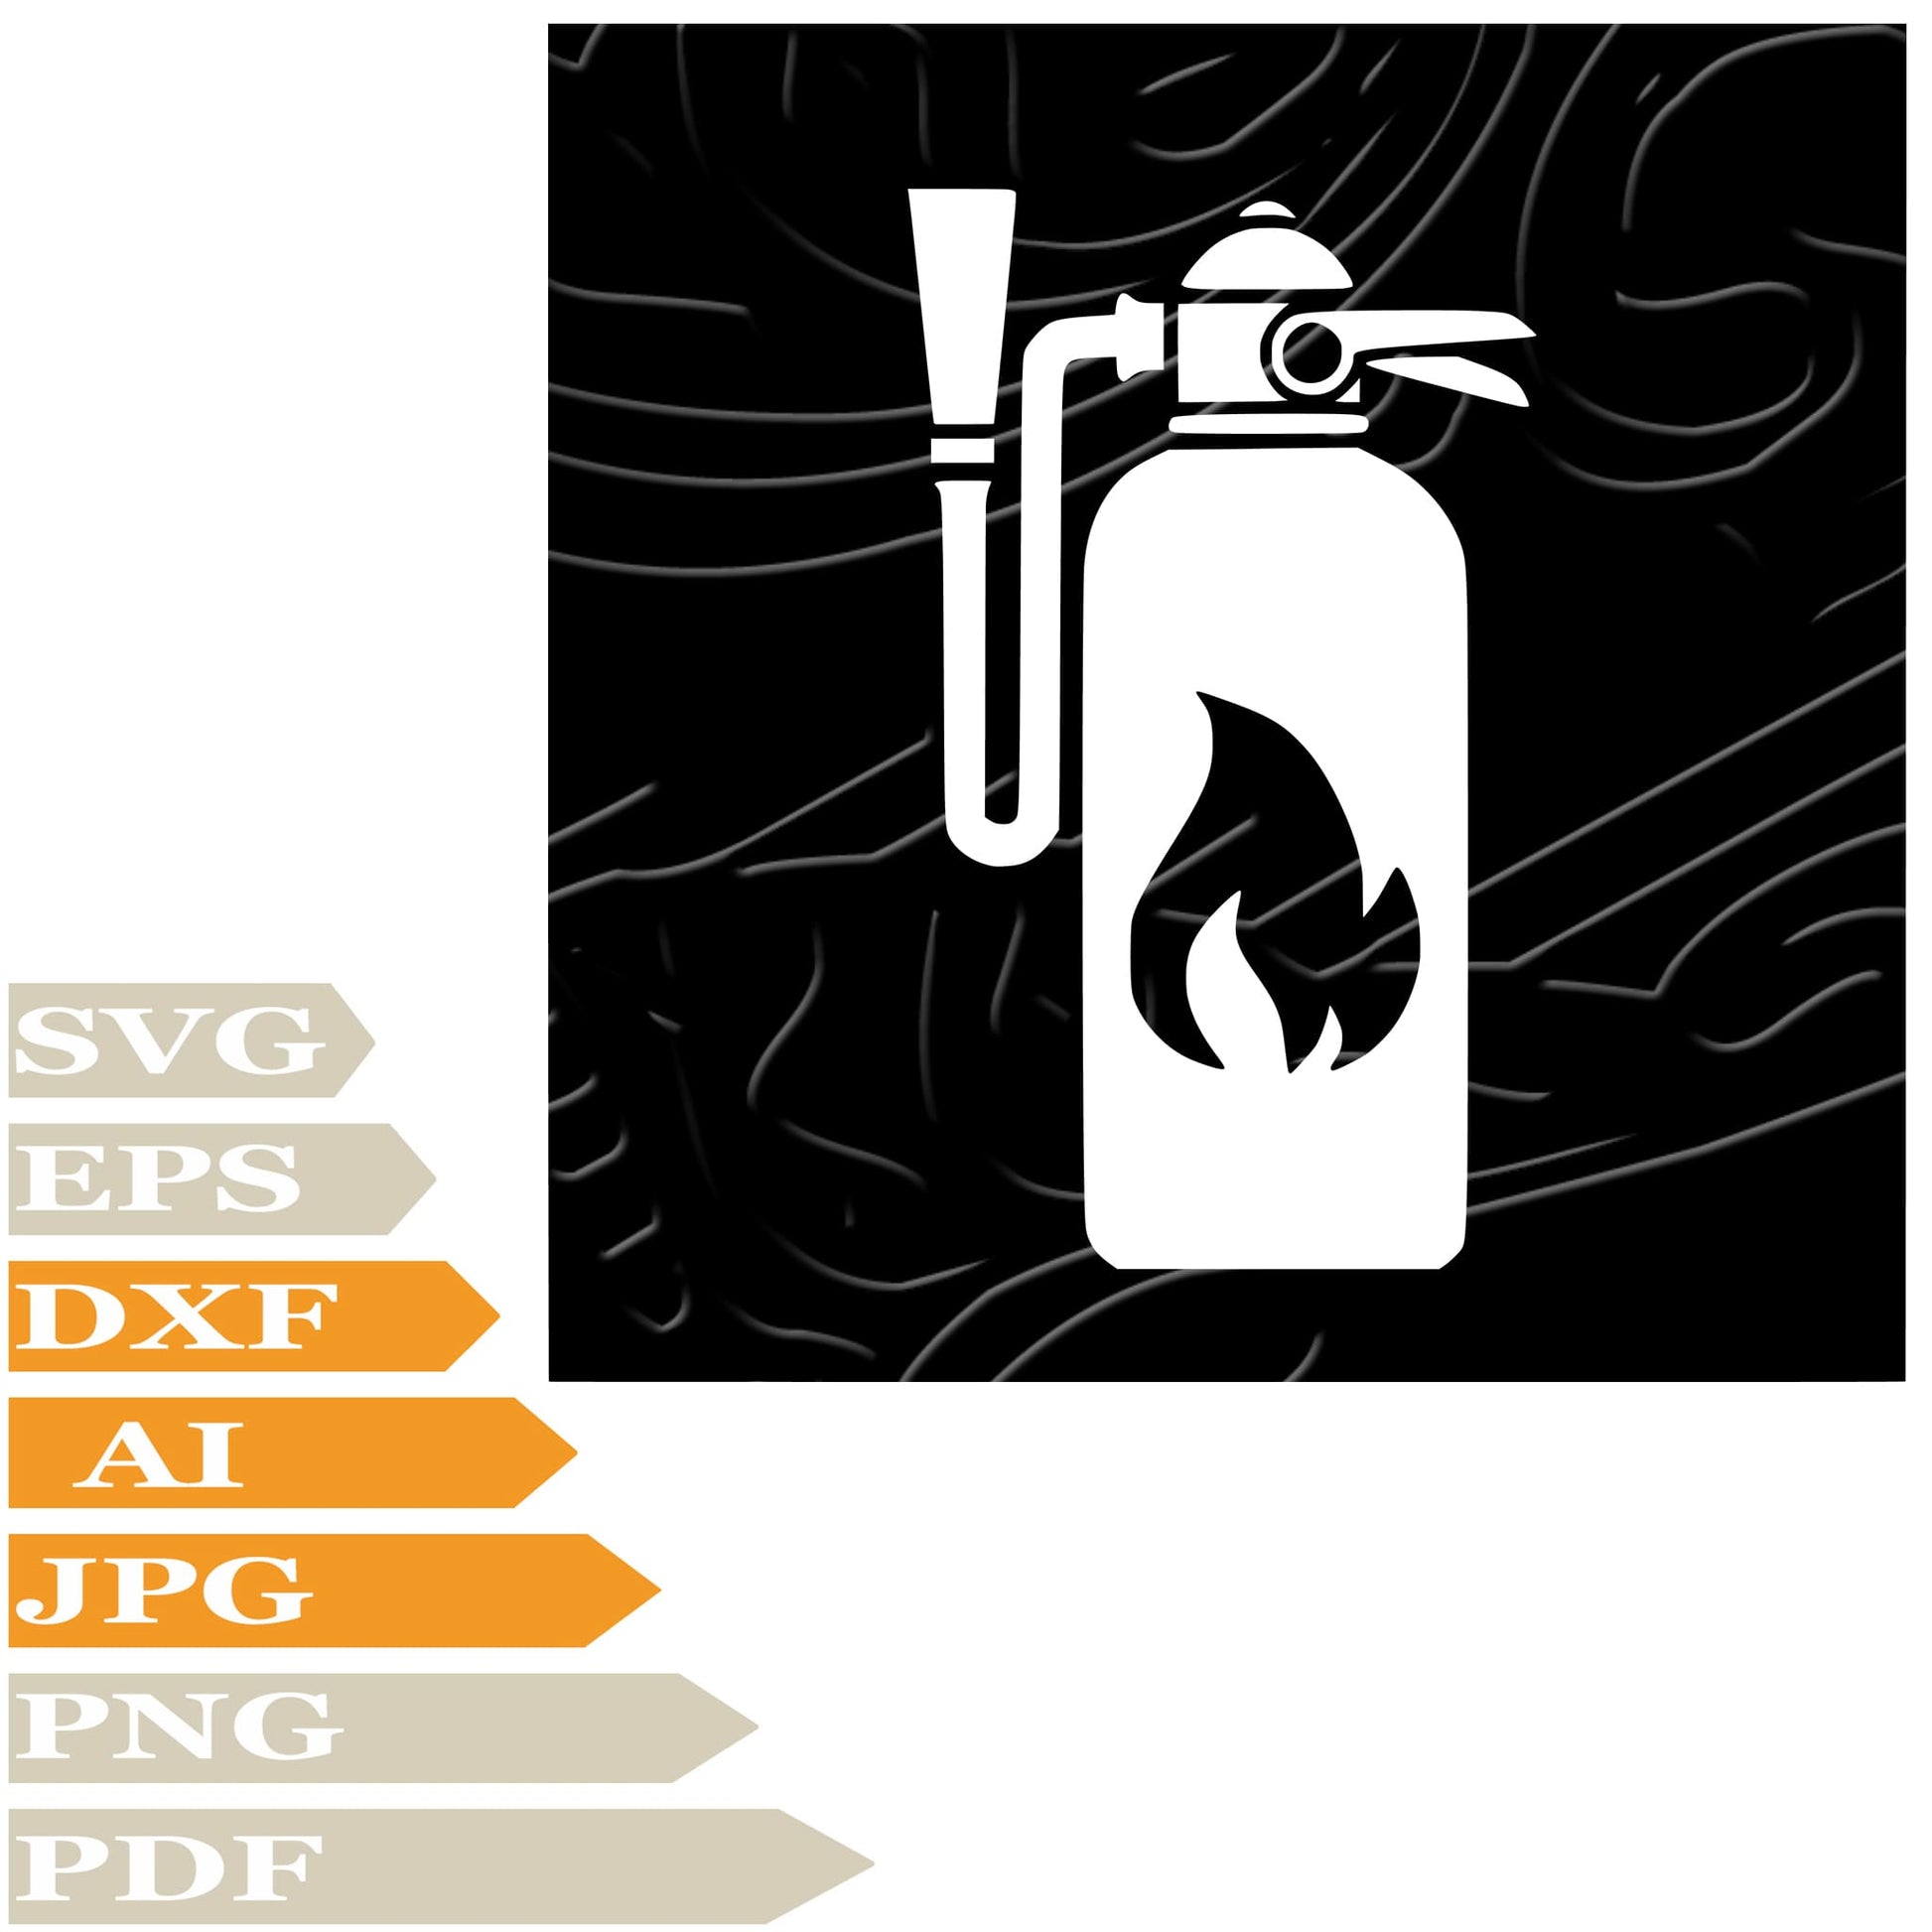 Signs SVG File - Fire Signs Vector Graphics - Fire Cylinder SVG Design - Fire Hatchet PNG-Cricut-Cut File-Clipart-For Tattoo-Print-Decal-Shirt-Silhouette